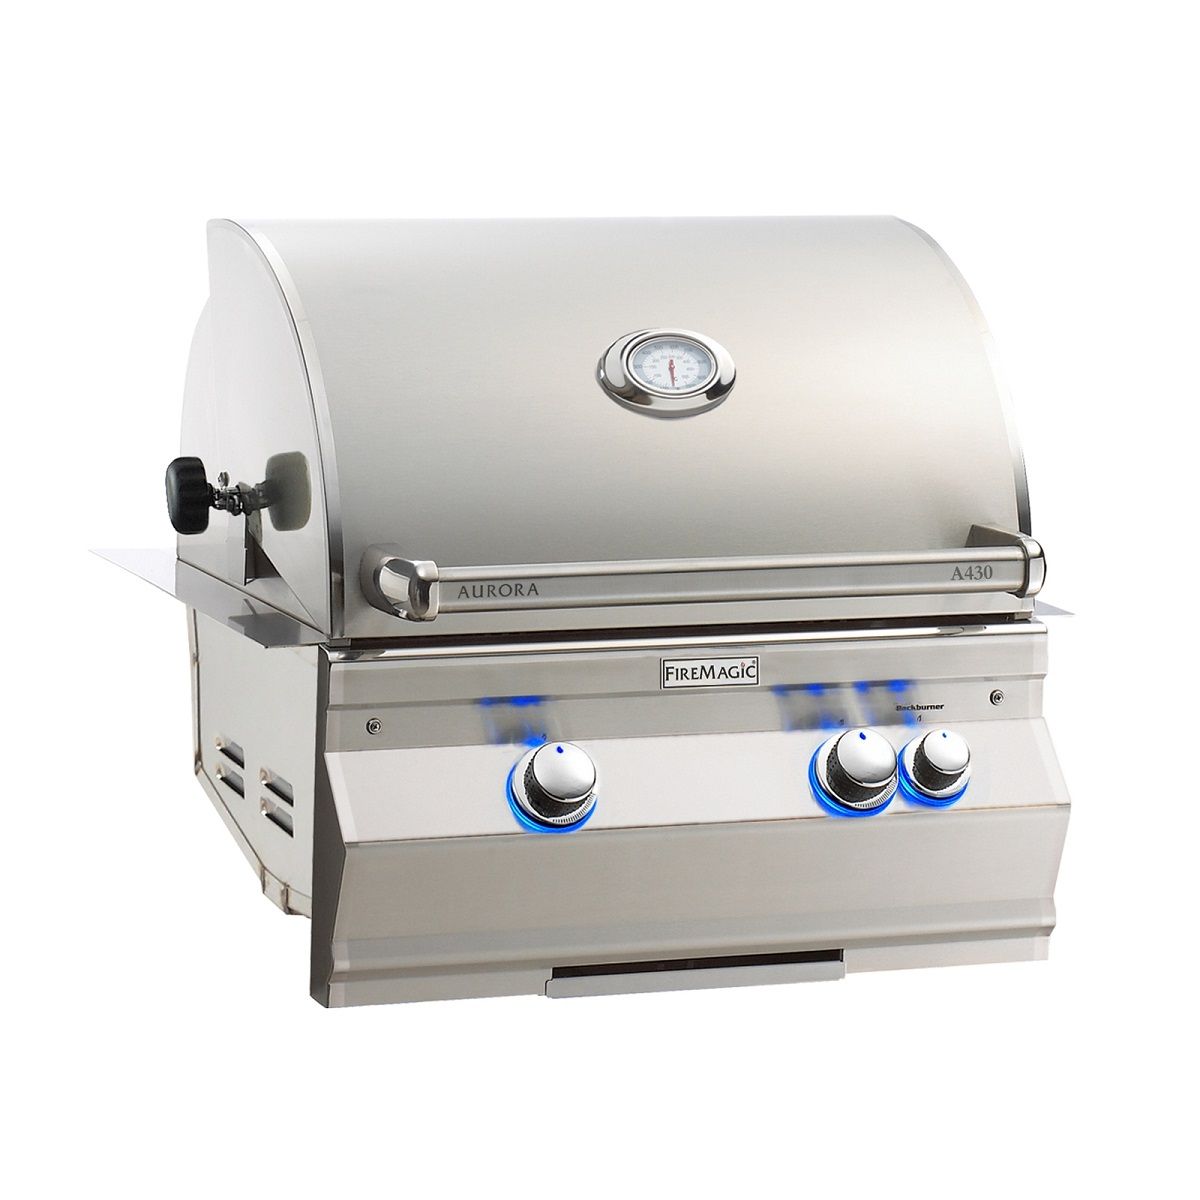 Fire Magic Aurora 24" Built-In Grills with Analog Thermometer A430i